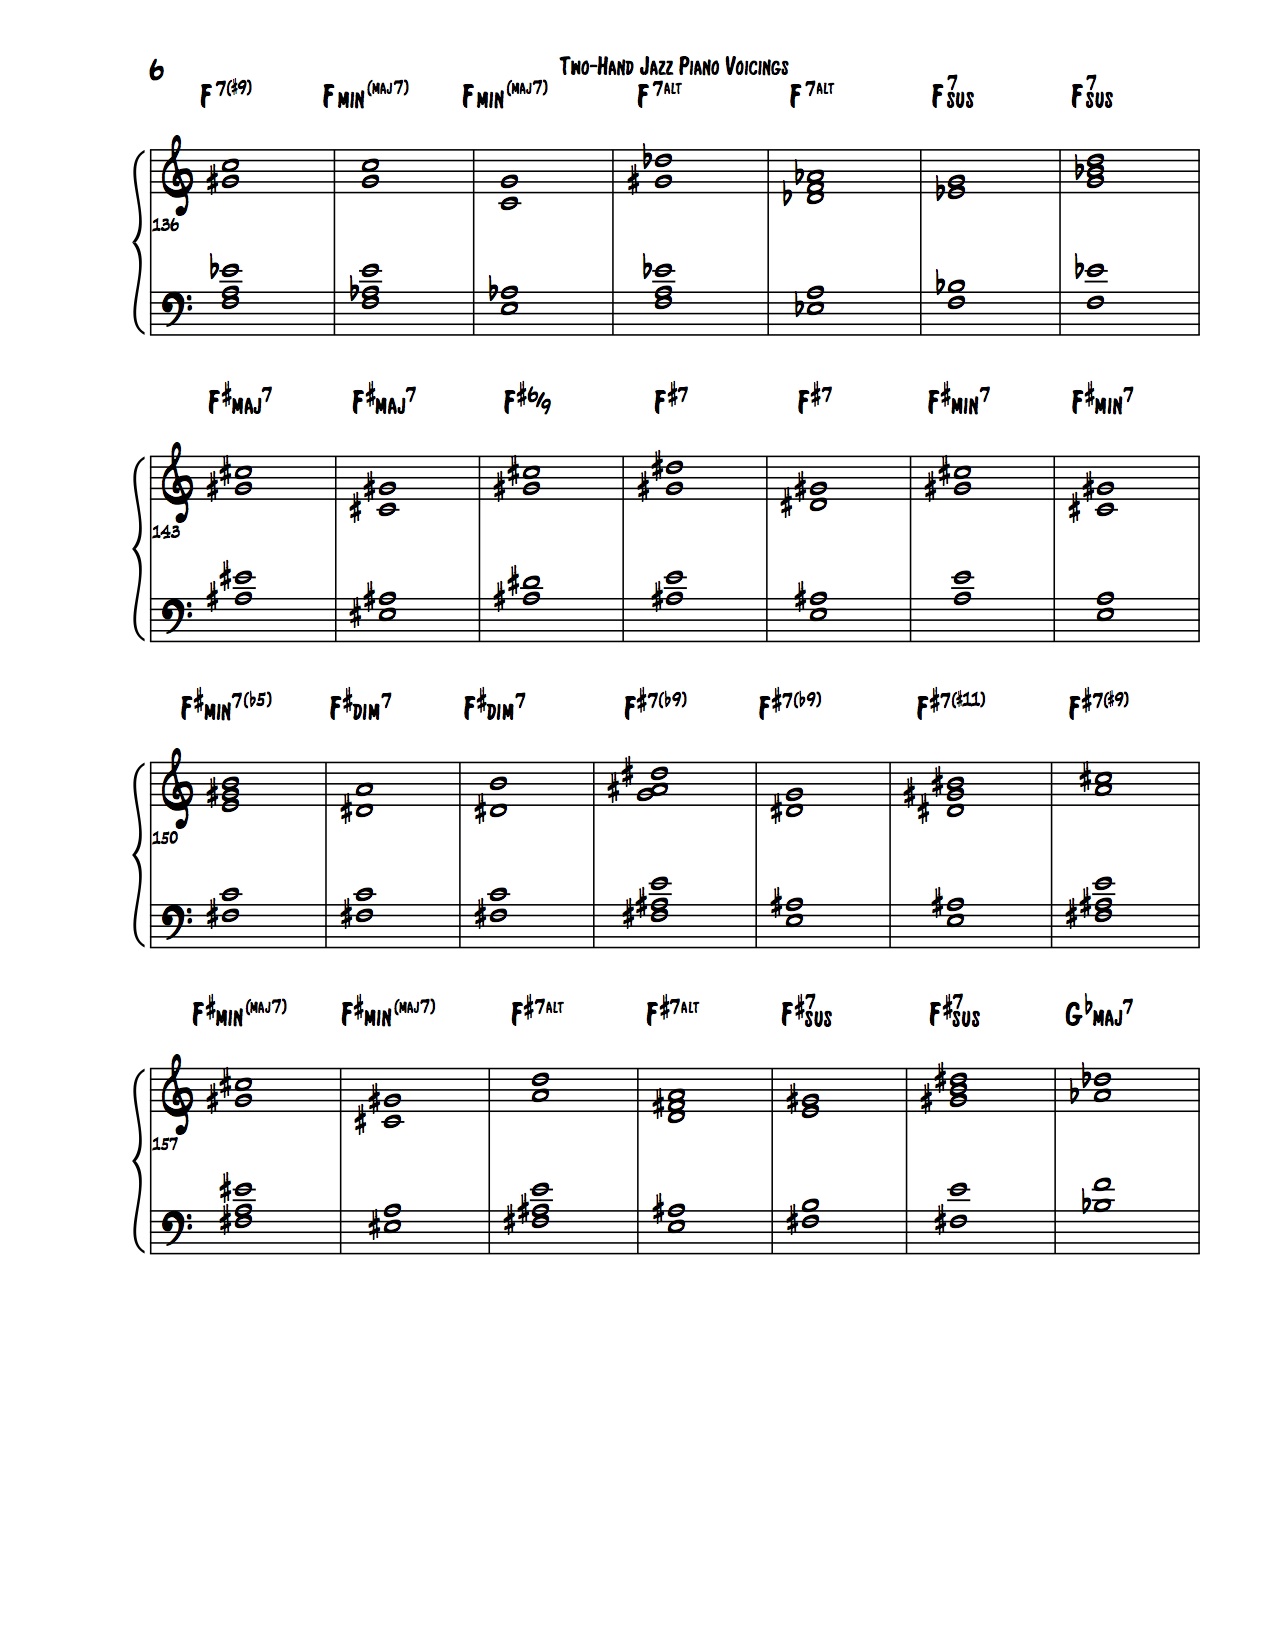 Encyclopedia of Two-Hand Jazz Piano Voicings - Learn Jazz ...